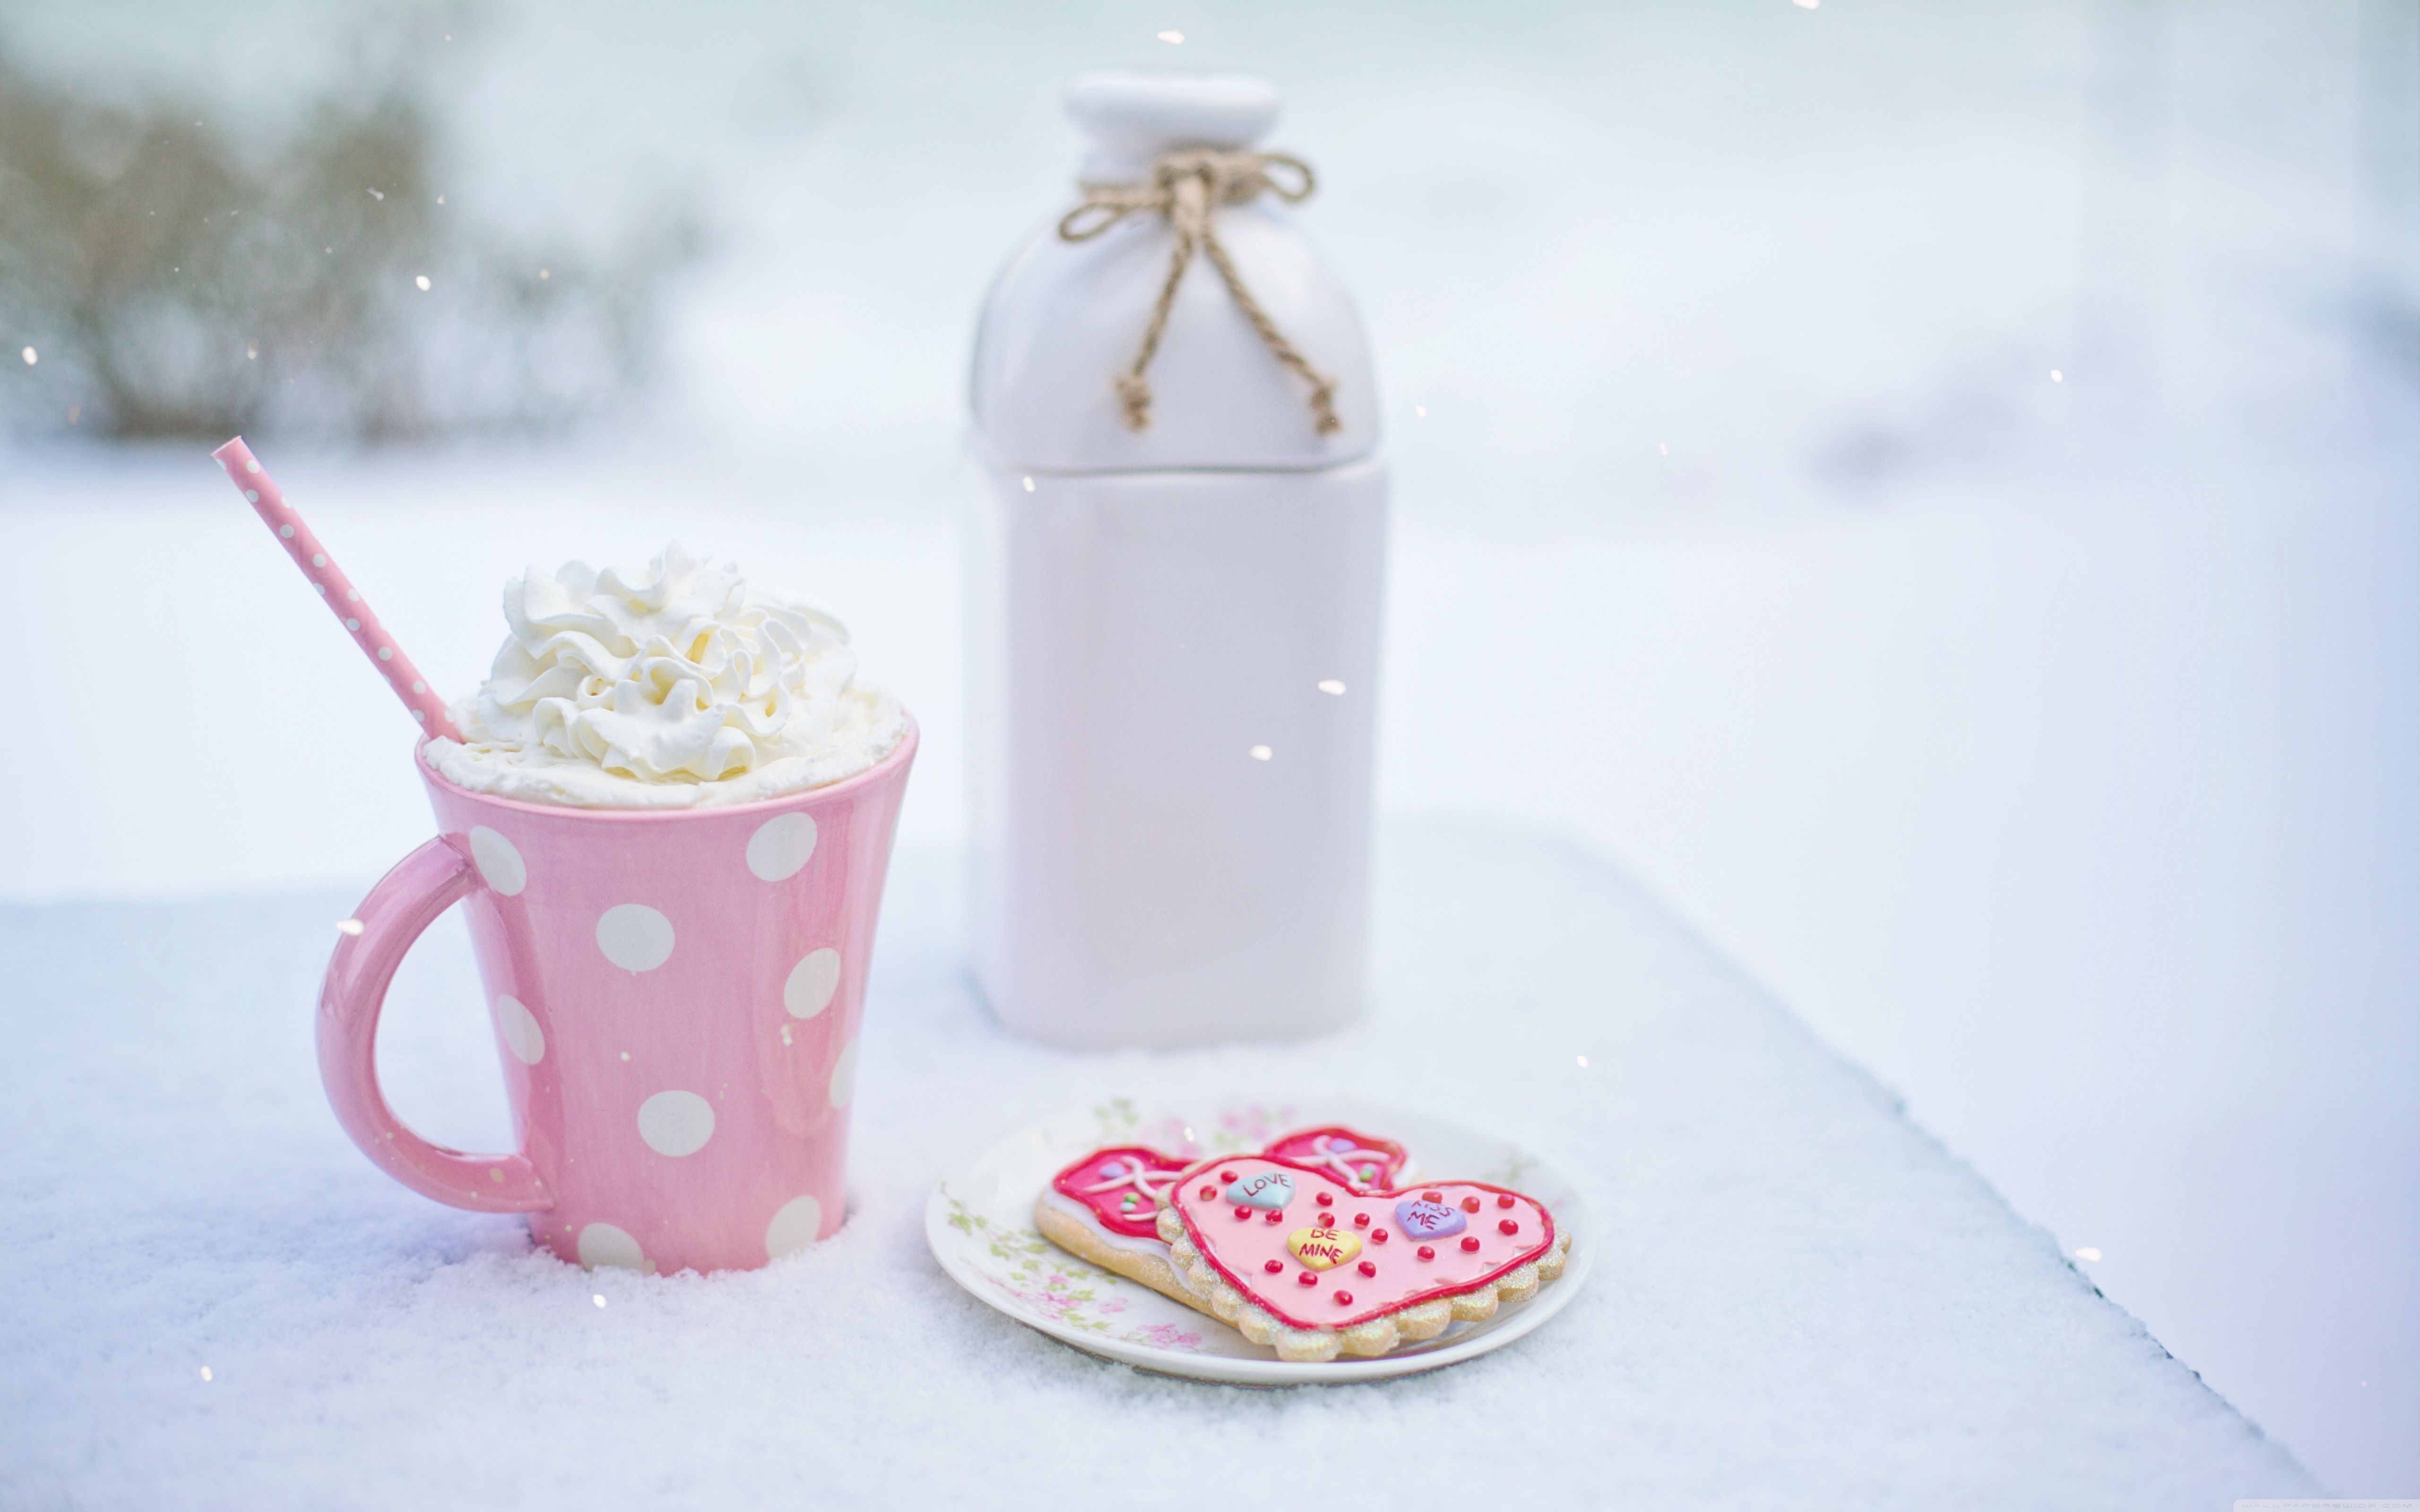 Valentine's Day Hot Chocolate and Heart Sugar Cookies Ultra HD Desktop Background Wallpaper for 4K UHD TV, Widescreen & UltraWide Desktop & Laptop, Multi Display, Dual Monitor, Tablet